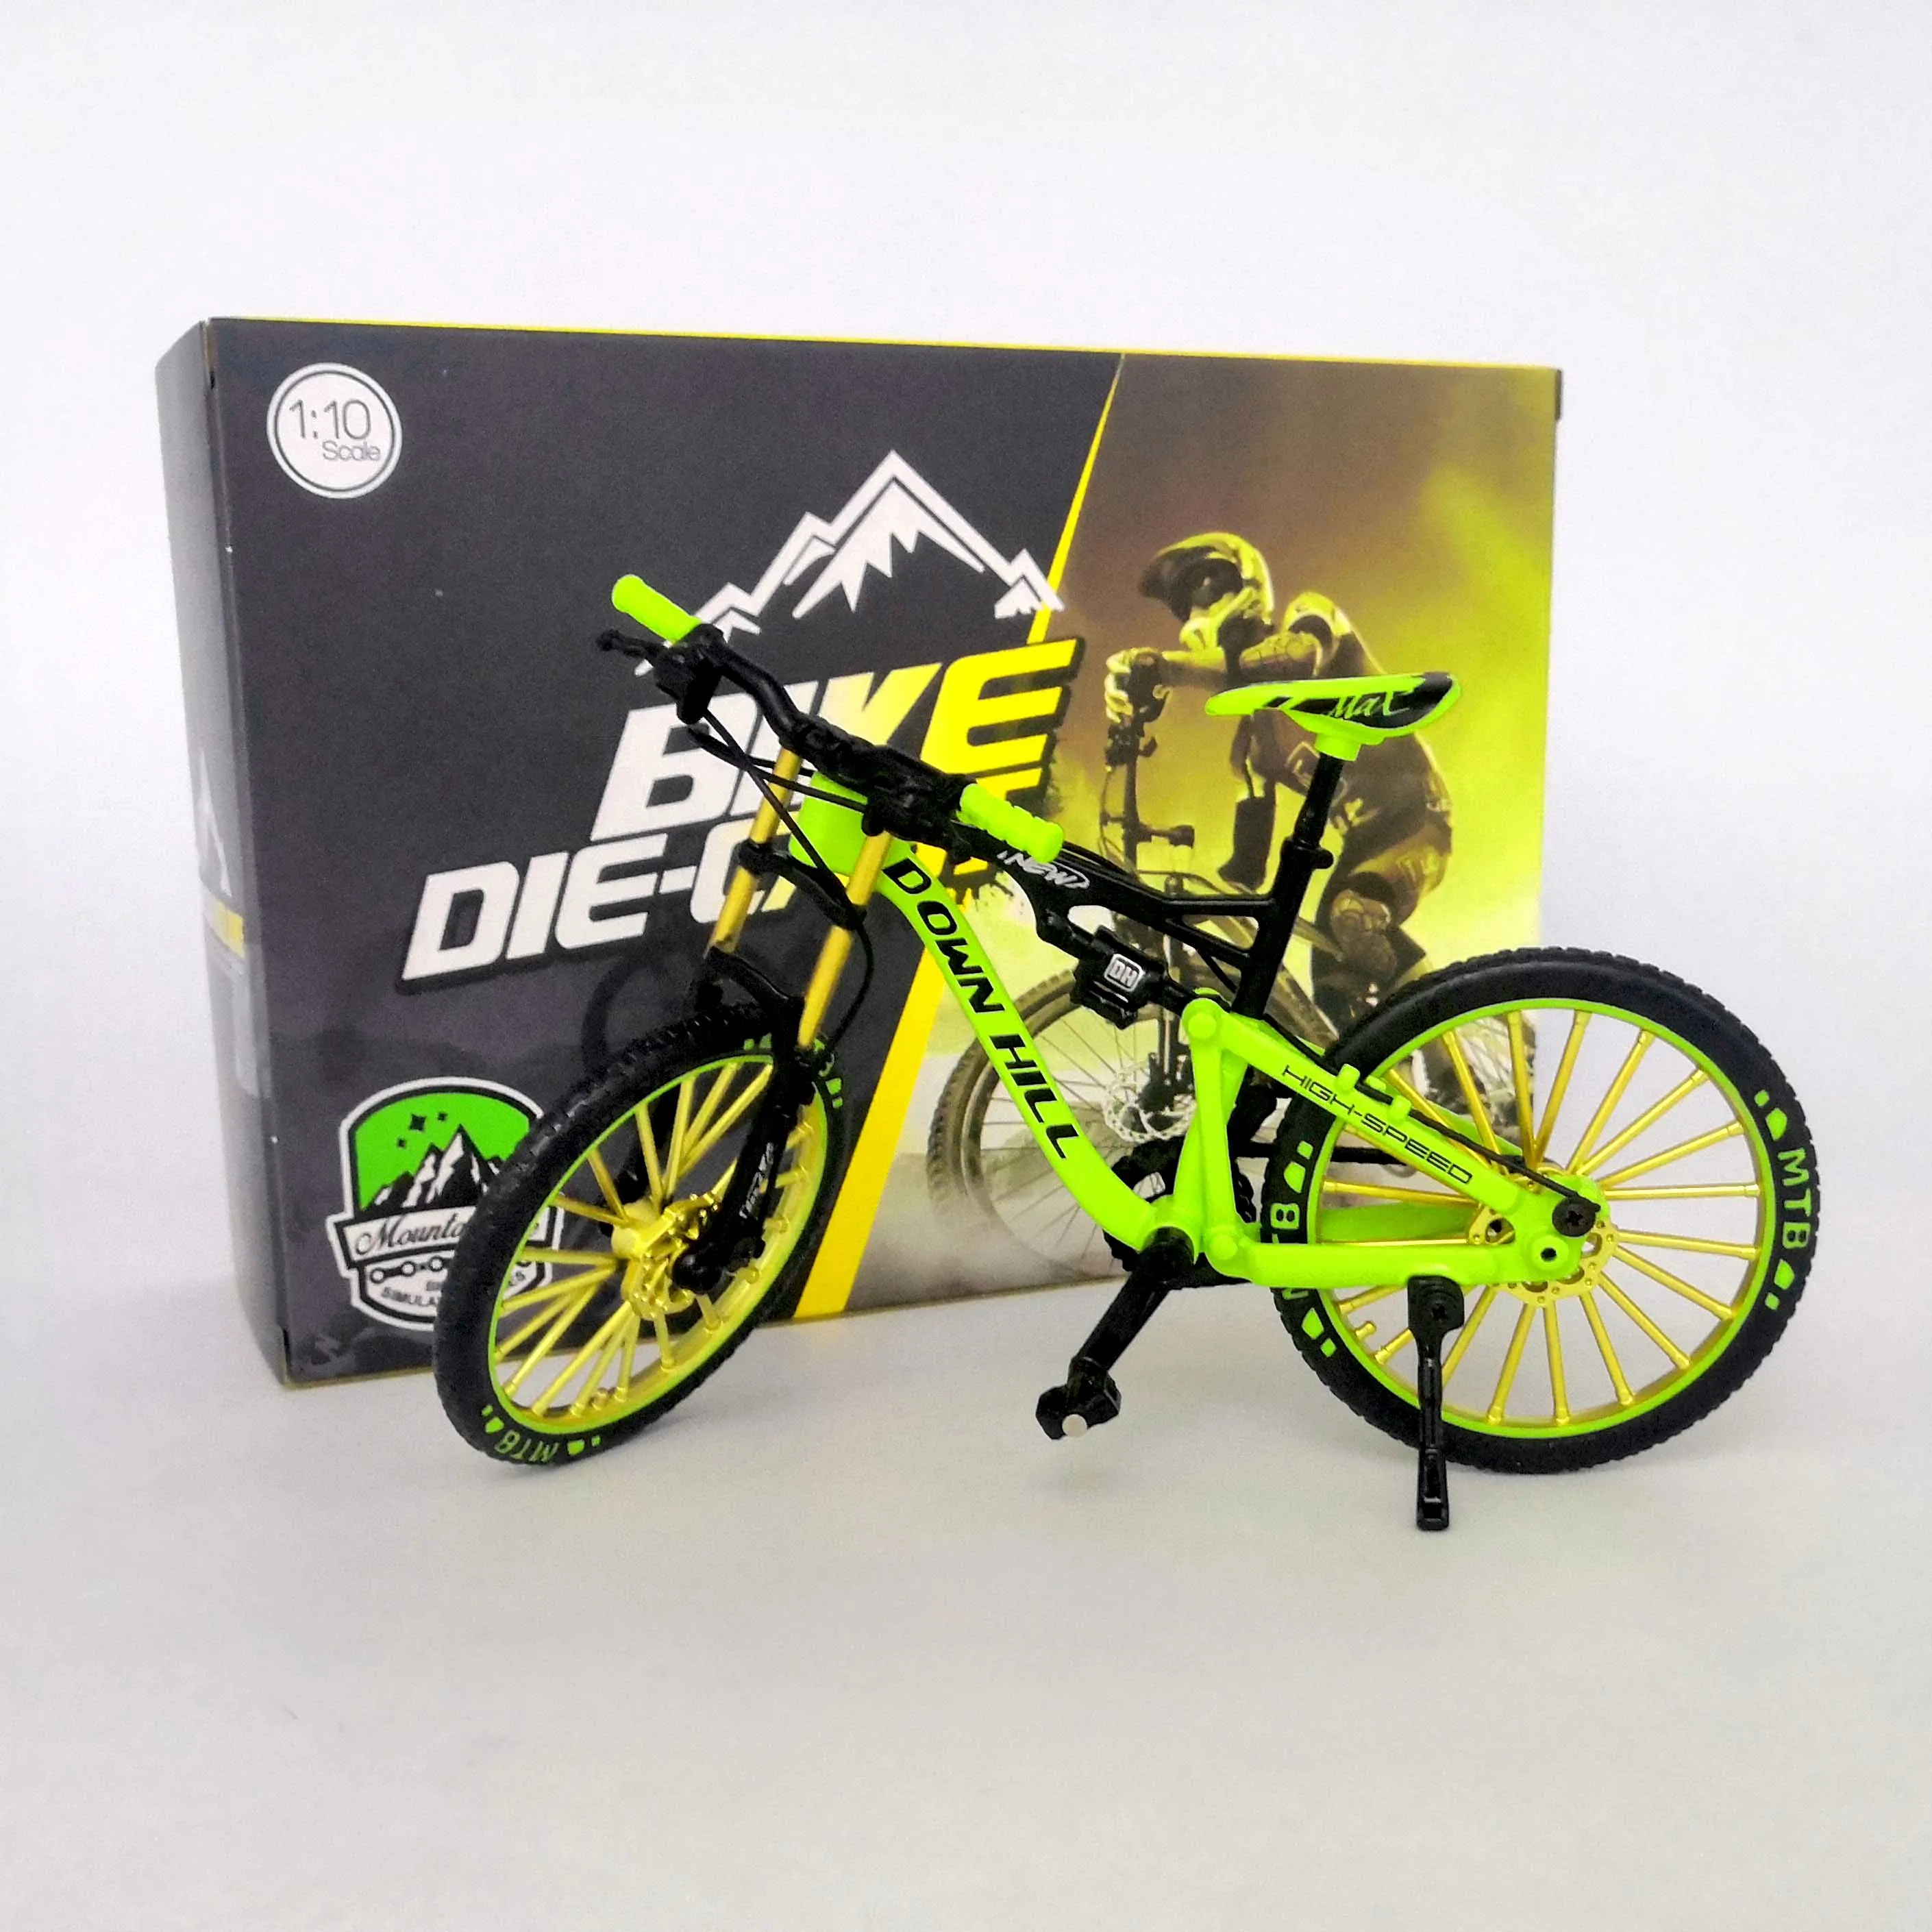 Scale 1:10 M & B Hobby Cycling Collection Diecast Green Mountain Bike Model 